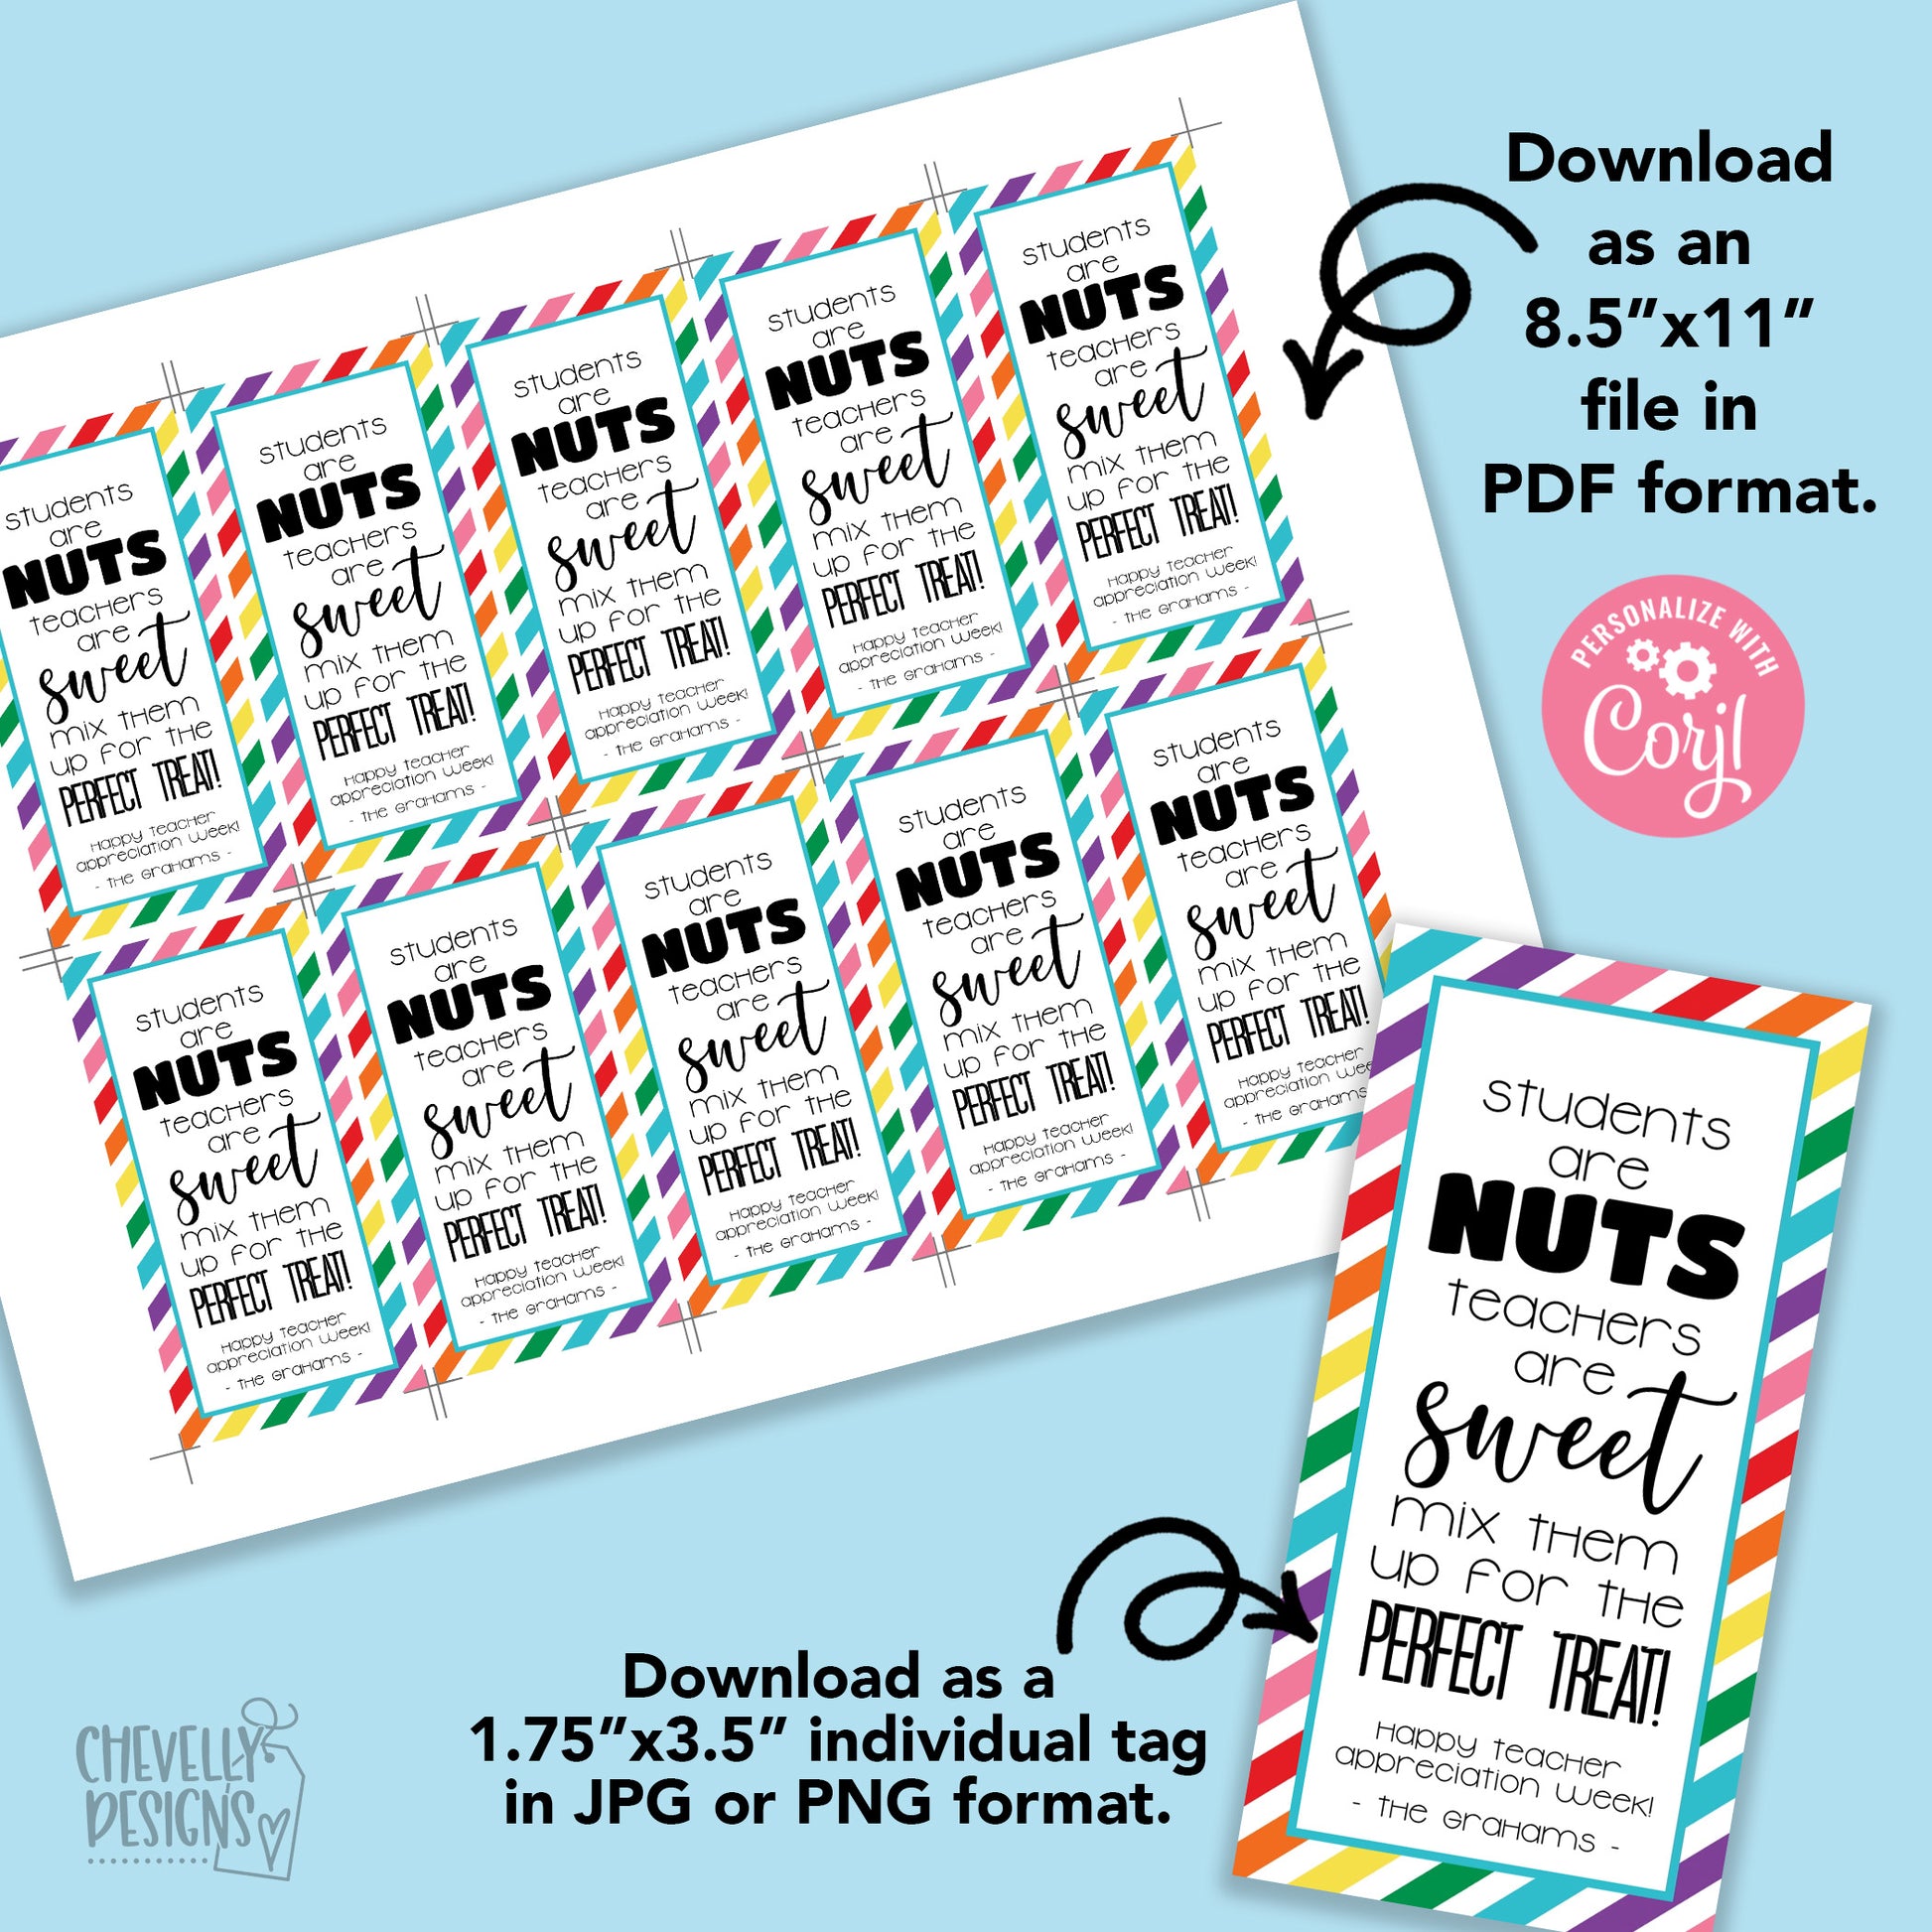 We Are Totally Nuts About You Tags, Trail Mix, Snack Mix, Mixed Nuts Gift  Tags, Teacher Appreciation, Employee Appreciation, Thank You Tags